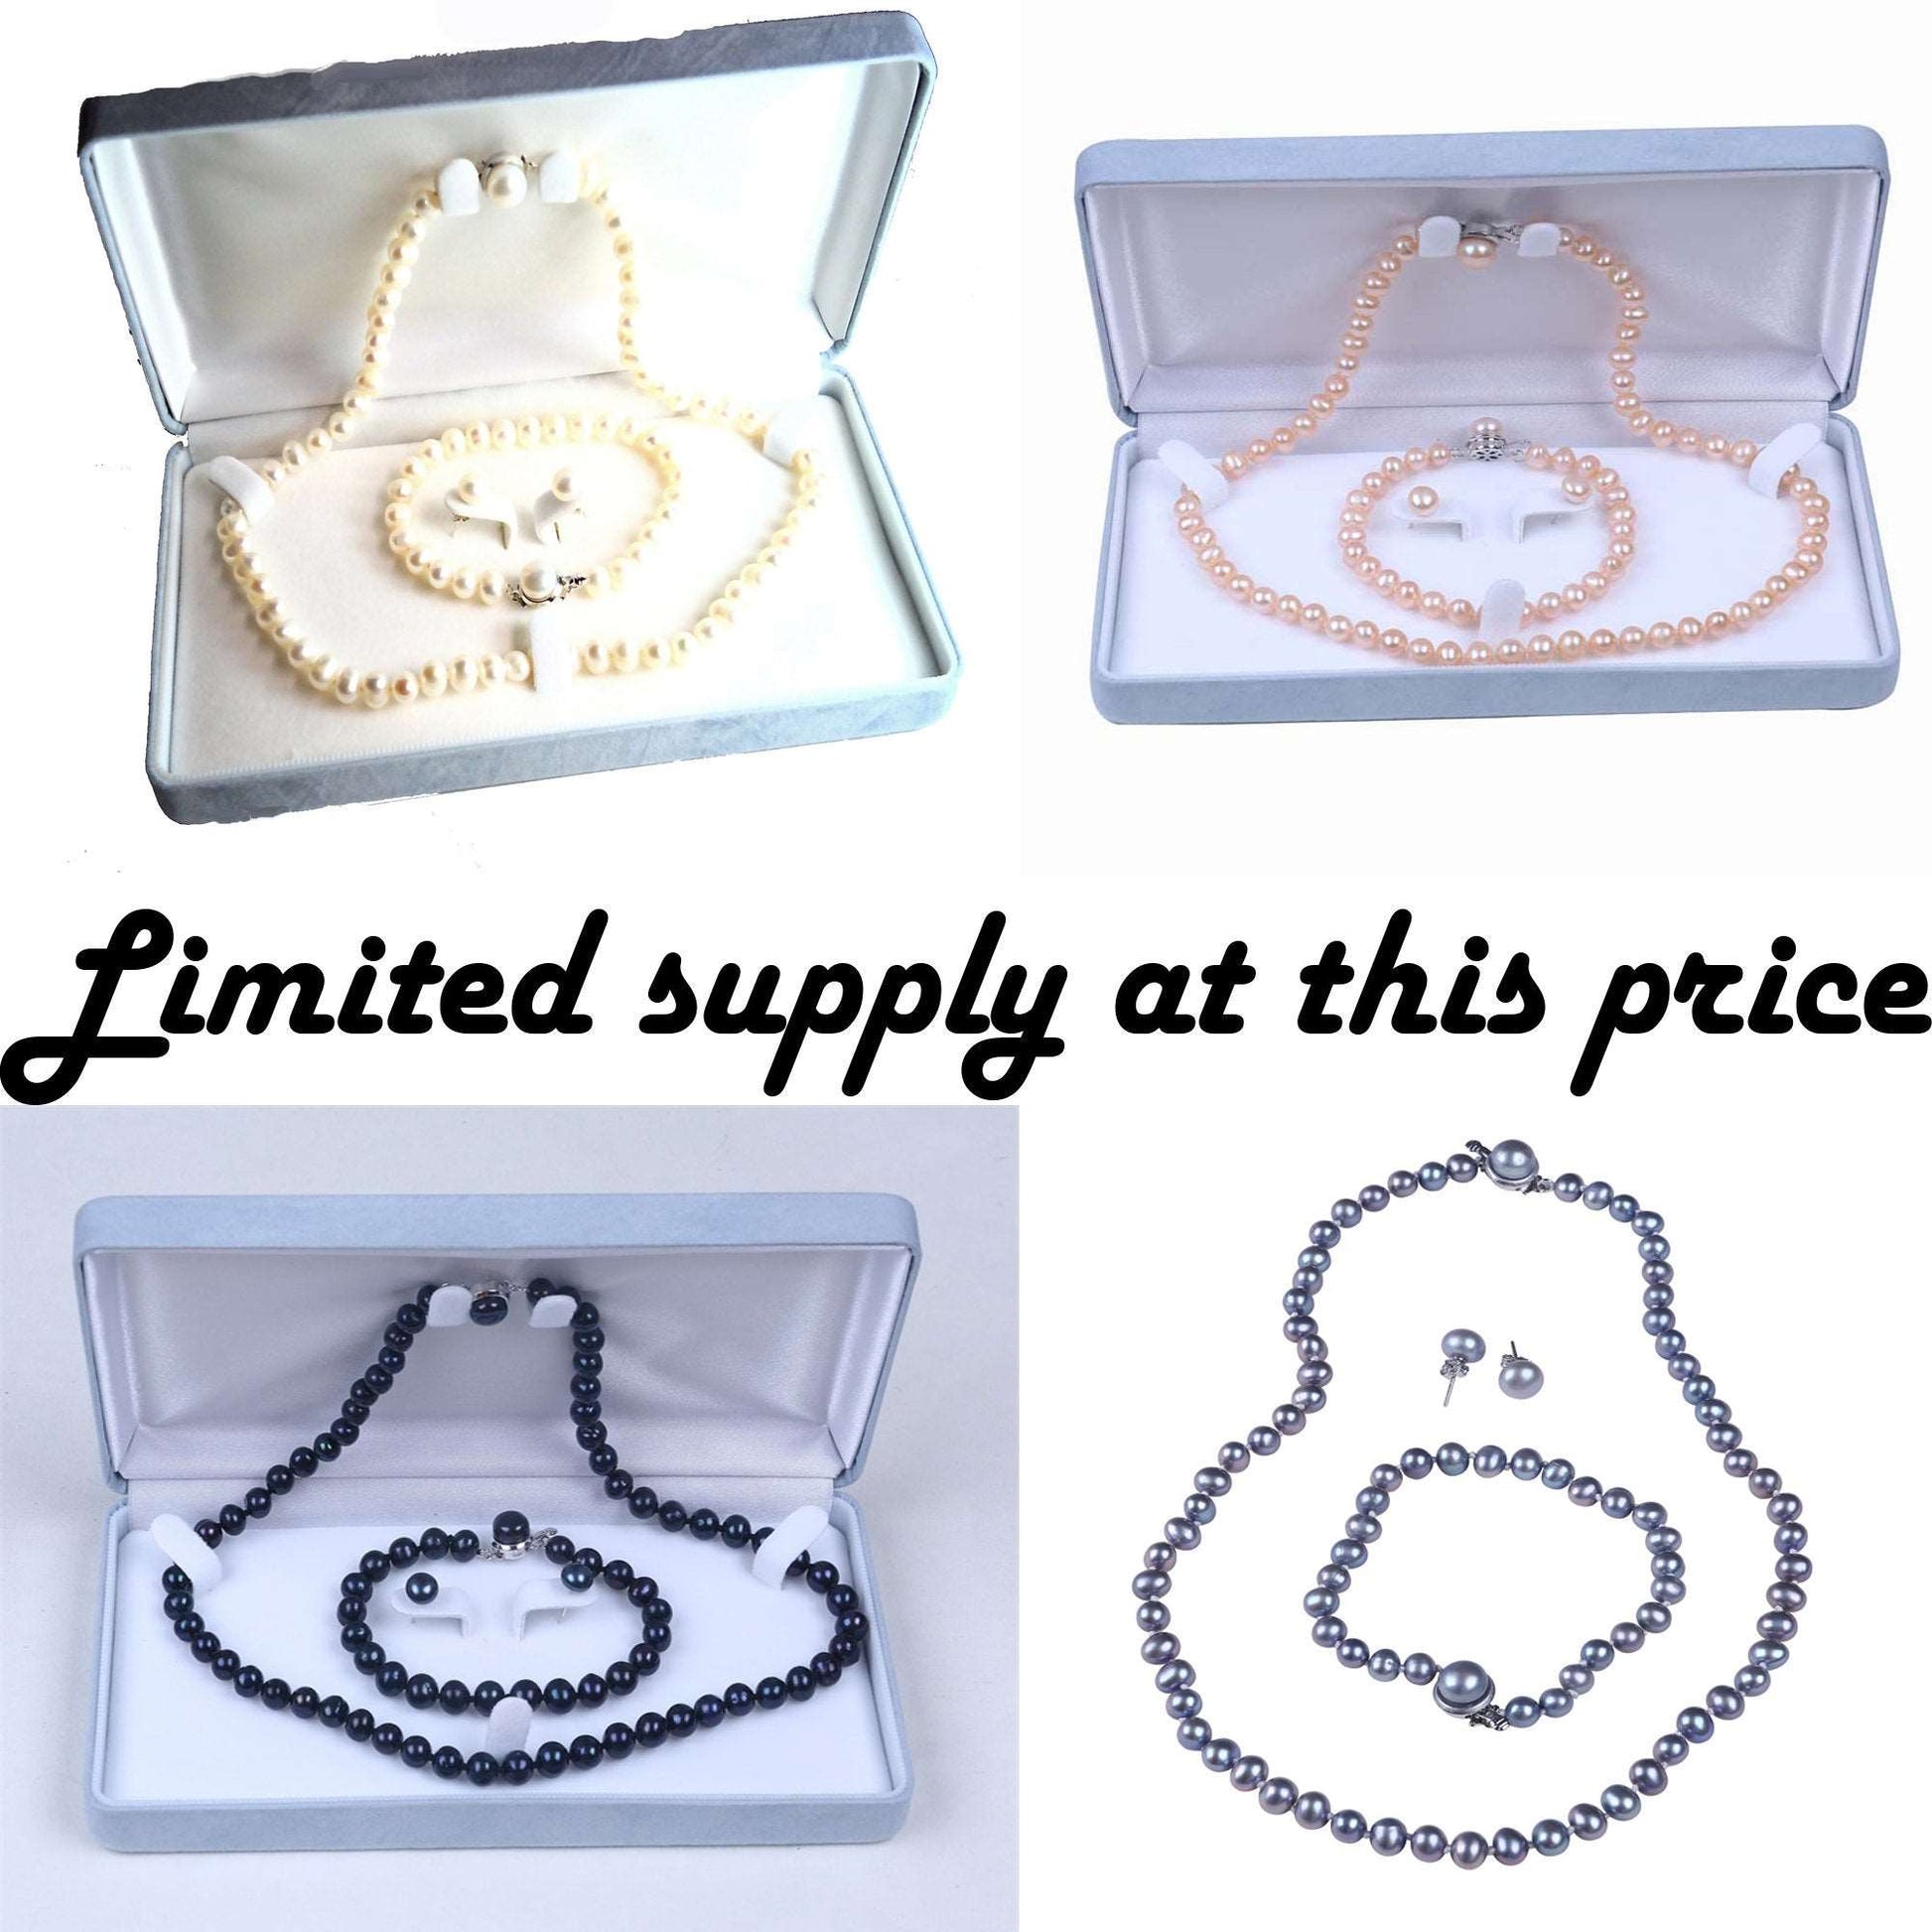 Quality 3 piece freshwater pearl set in elegant gift box-Wholesale - Providence silver gold jewelry usa